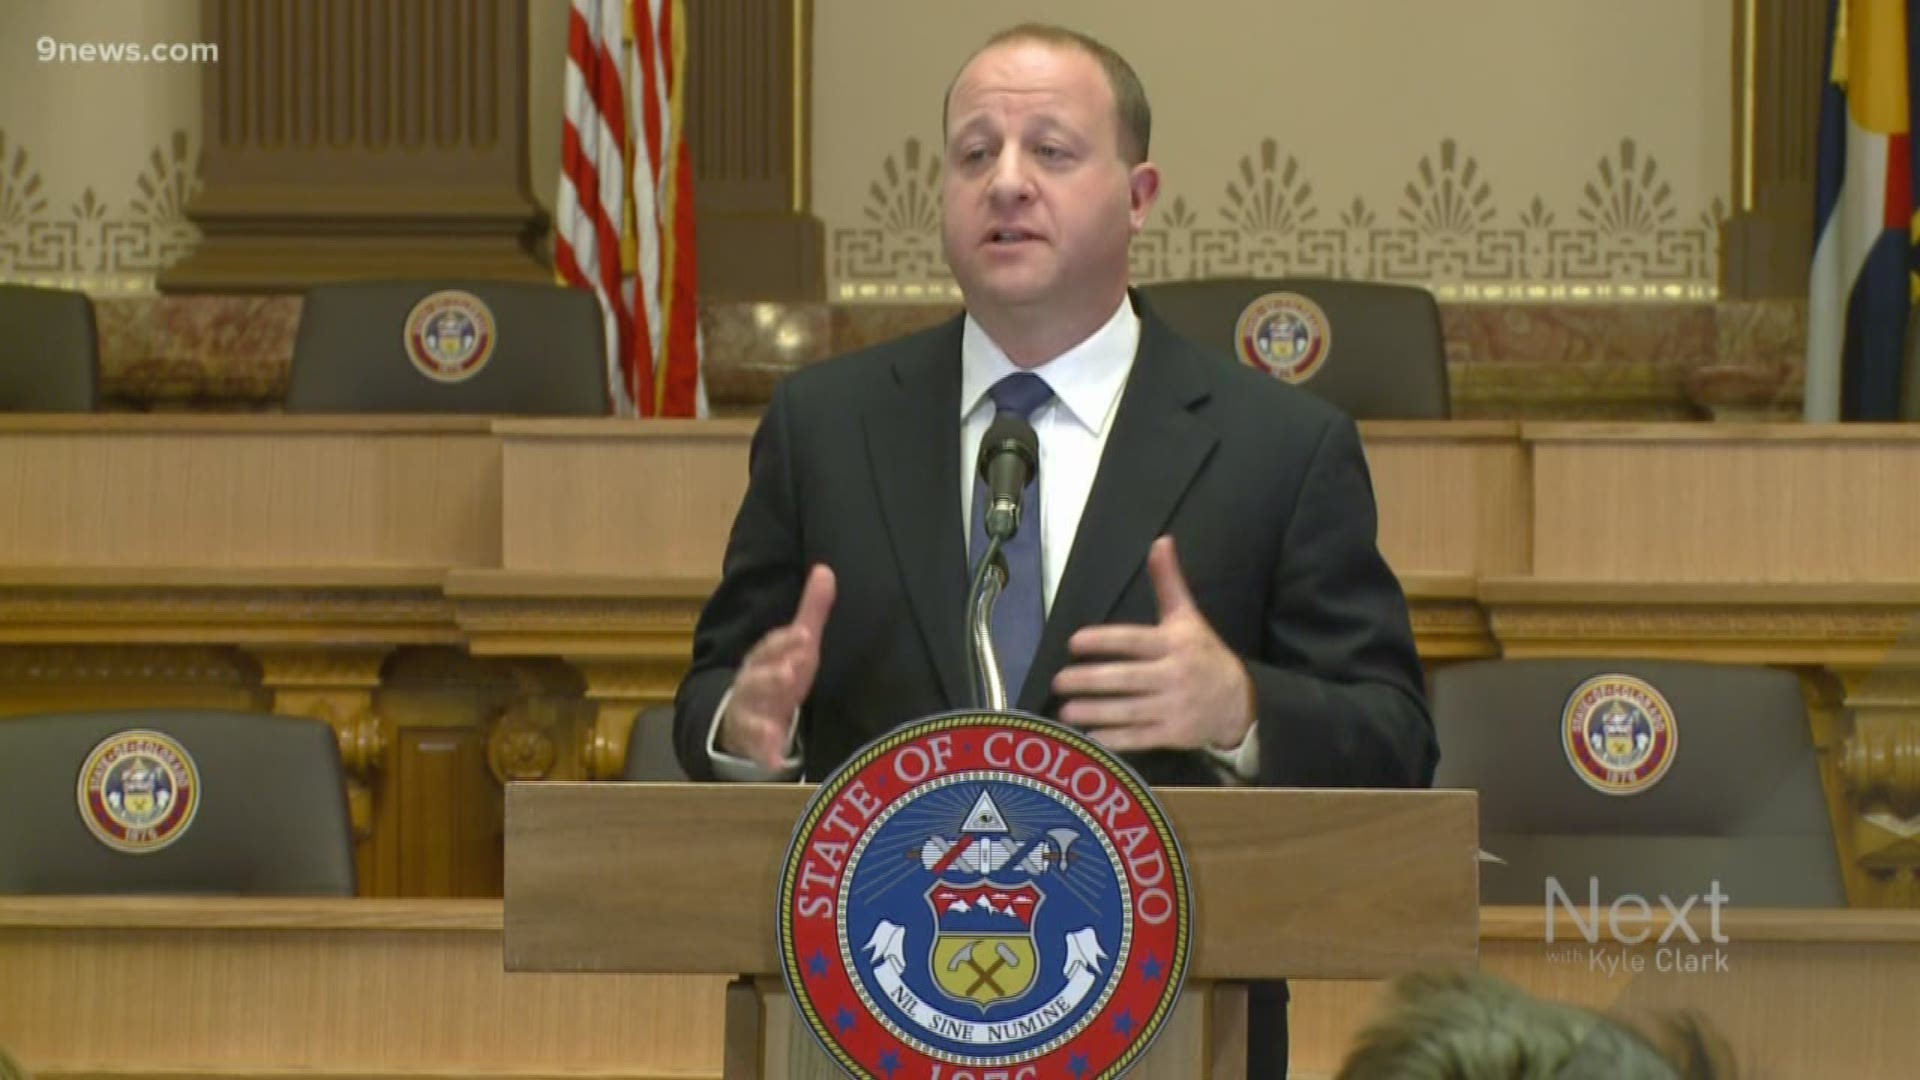 Jared Polis said the decision highlights the need to abolish the electoral college all together.